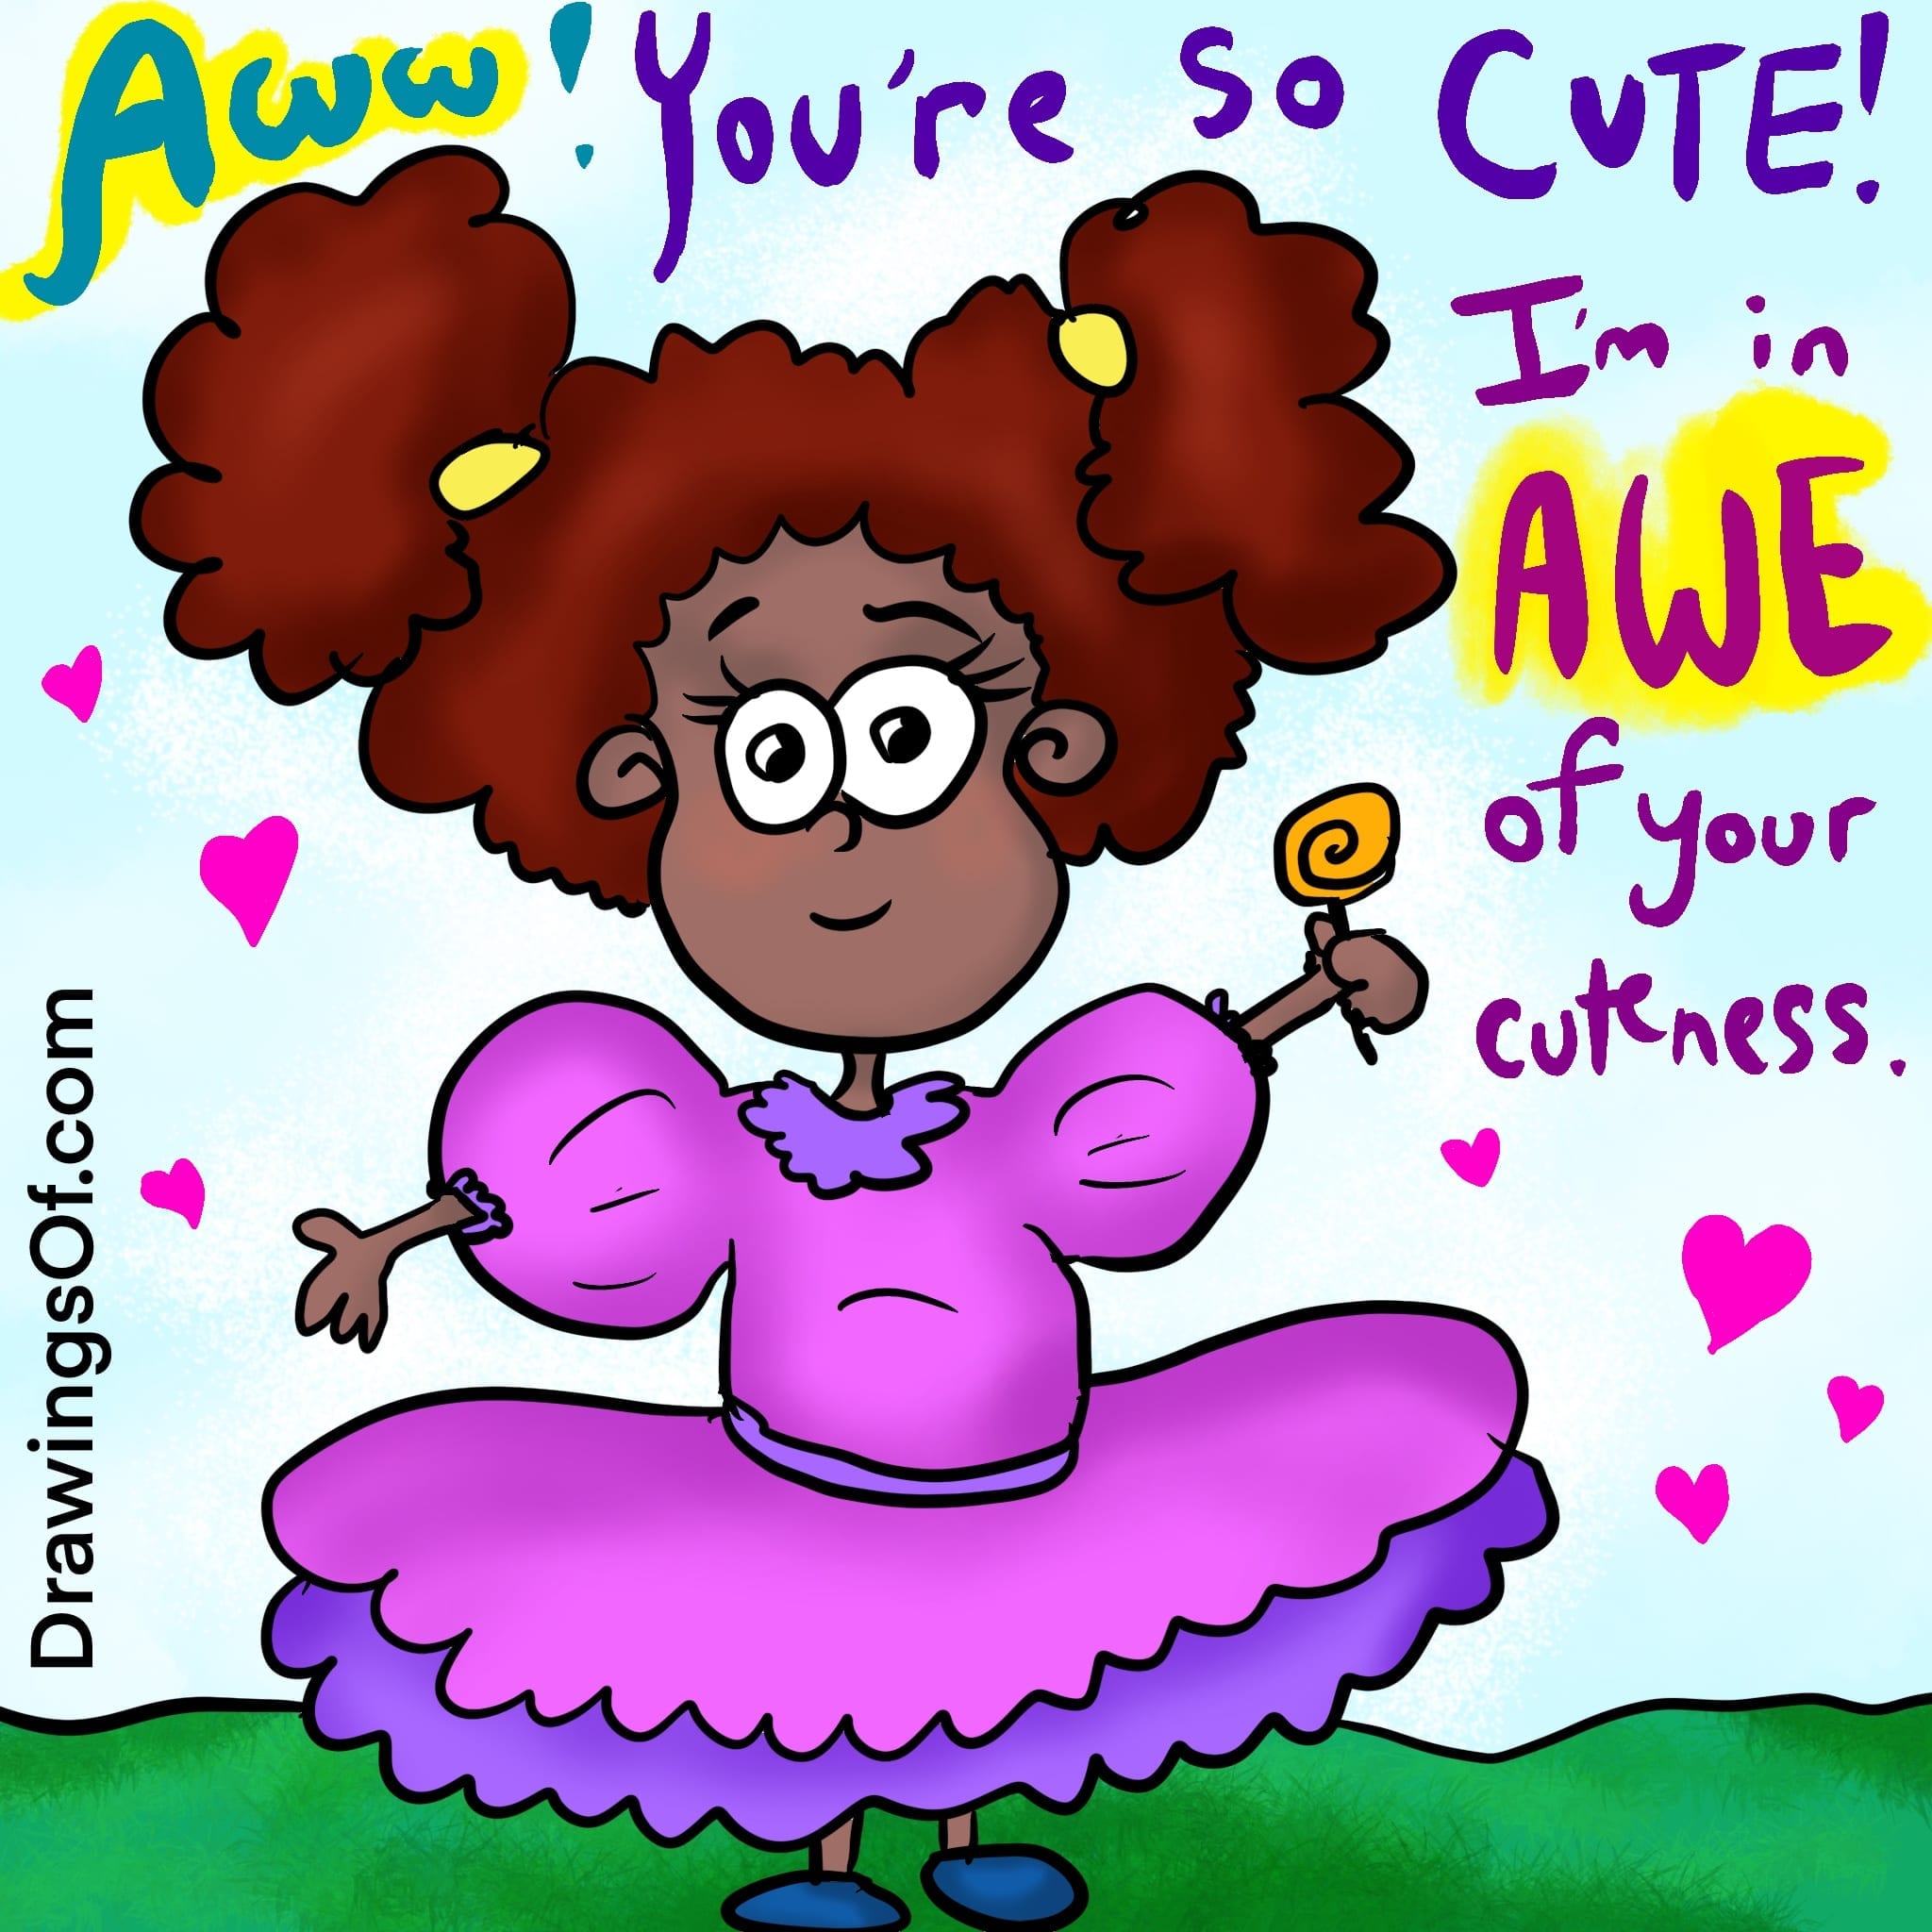 Aww or Awe? What's the Difference and Meaning? - Drawings Of...